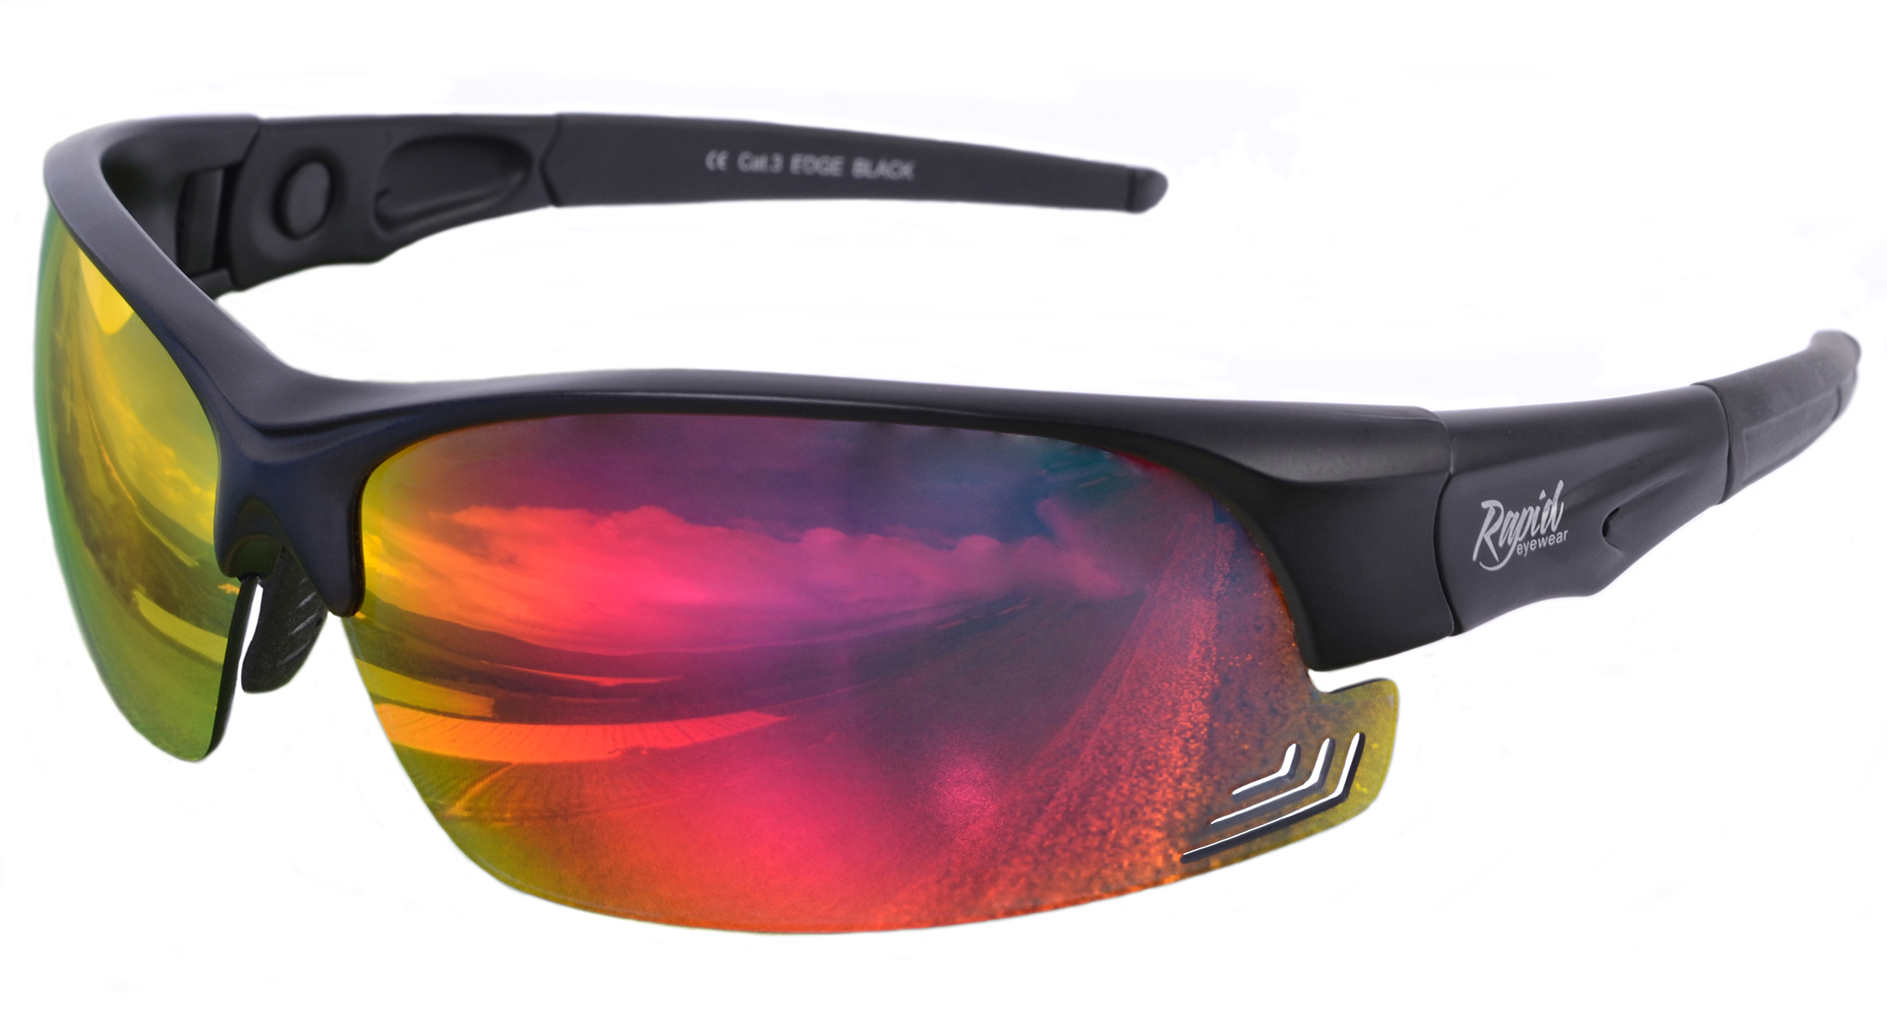 Sunglasses for skiing